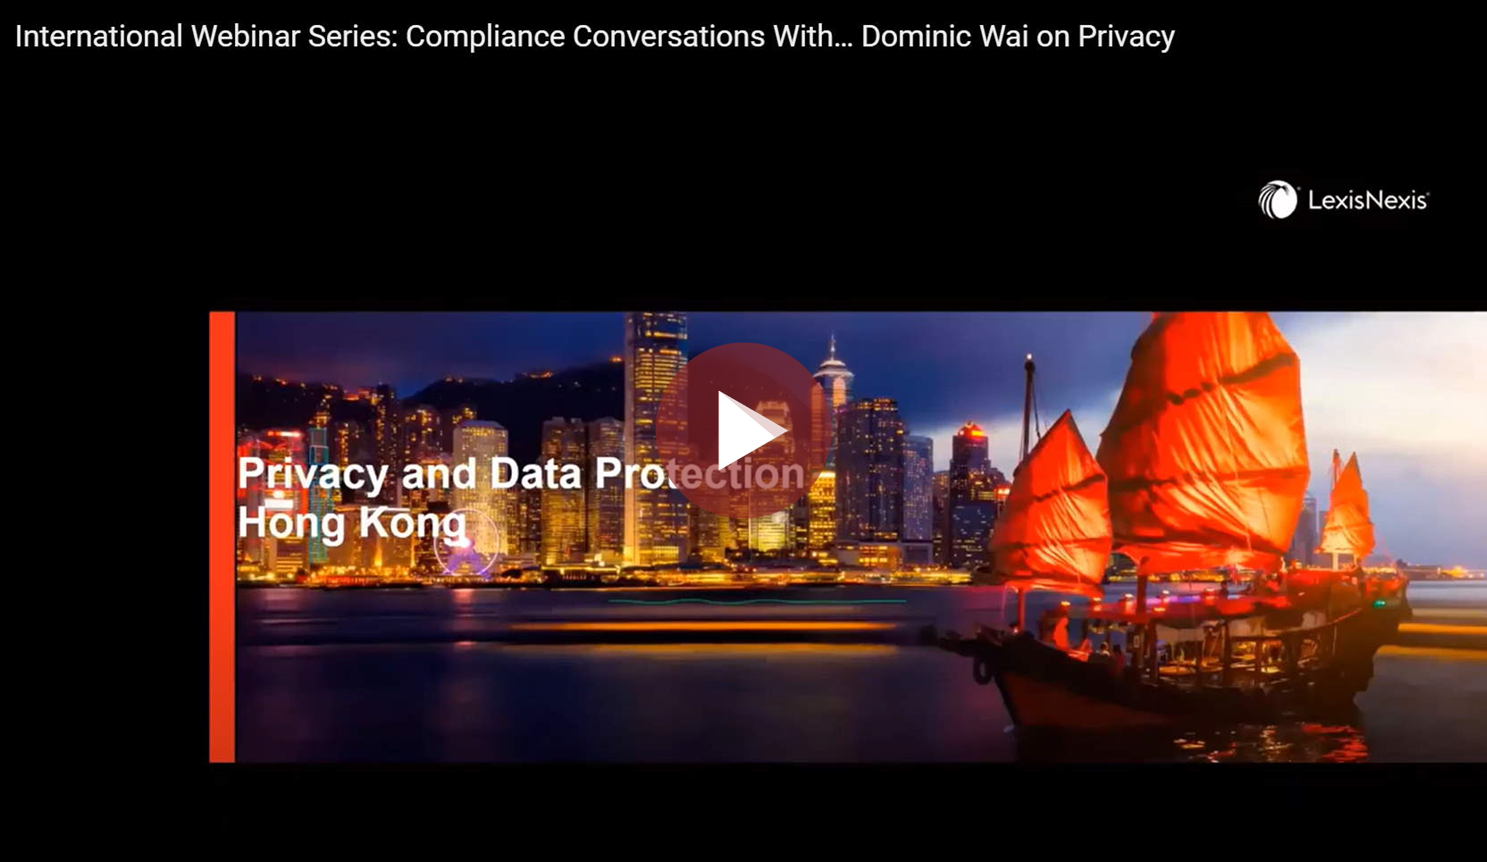 International Webinar Series: Compliance Conversations With… Dominic Wai on Privacy